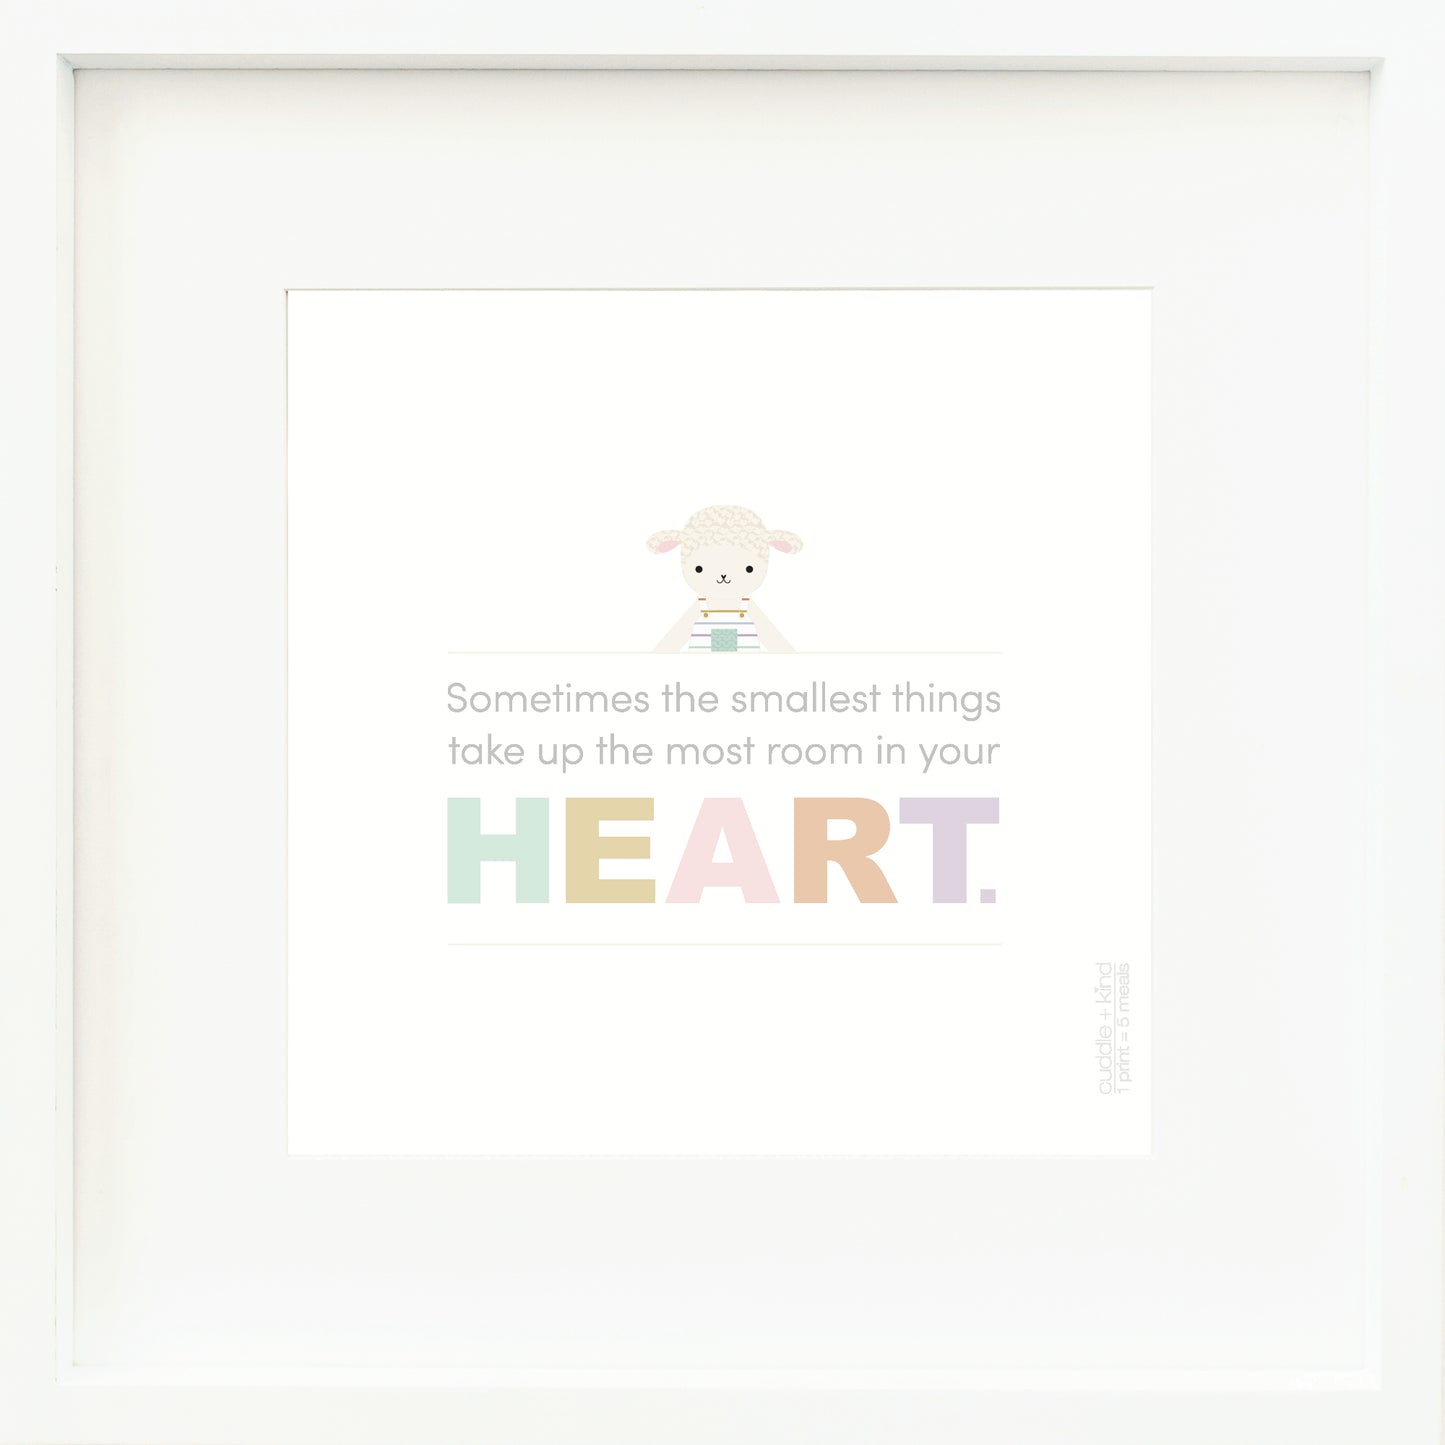 A framed print with a drawing of Avery the lamb and text that says “Sometimes the smallest things take up the most room in your heart.”